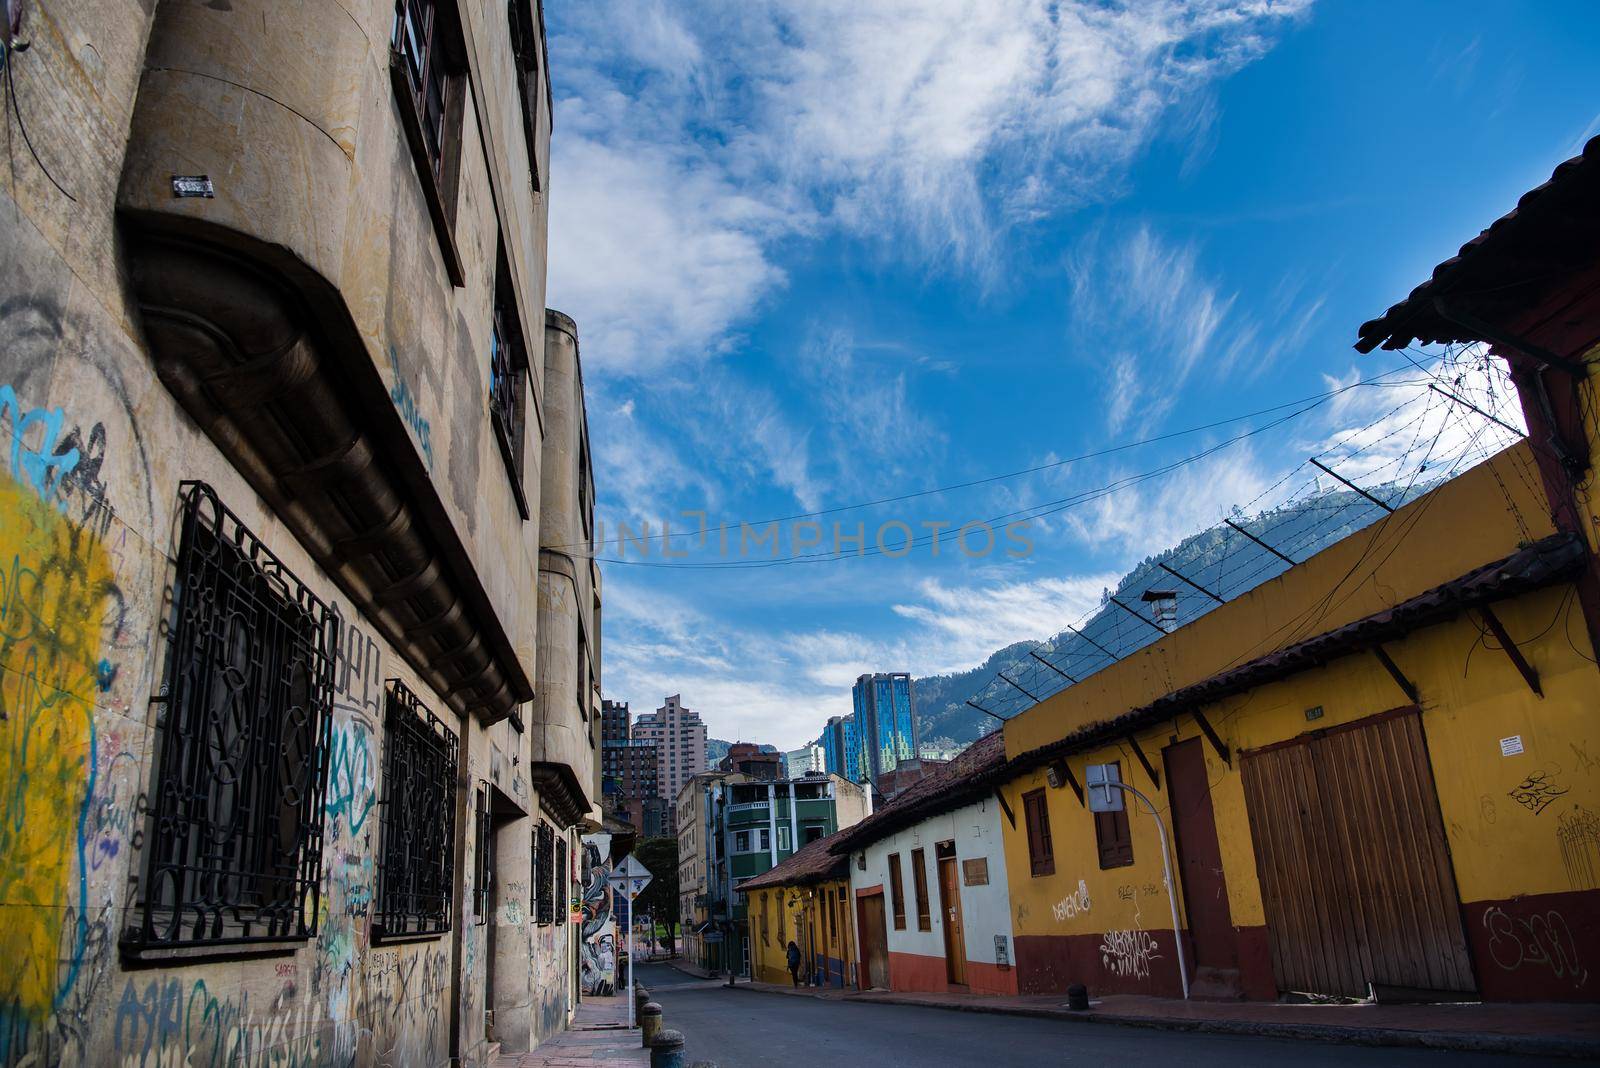 Graffiti homes with colorful art in Bogota, Colombia. by jyurinko